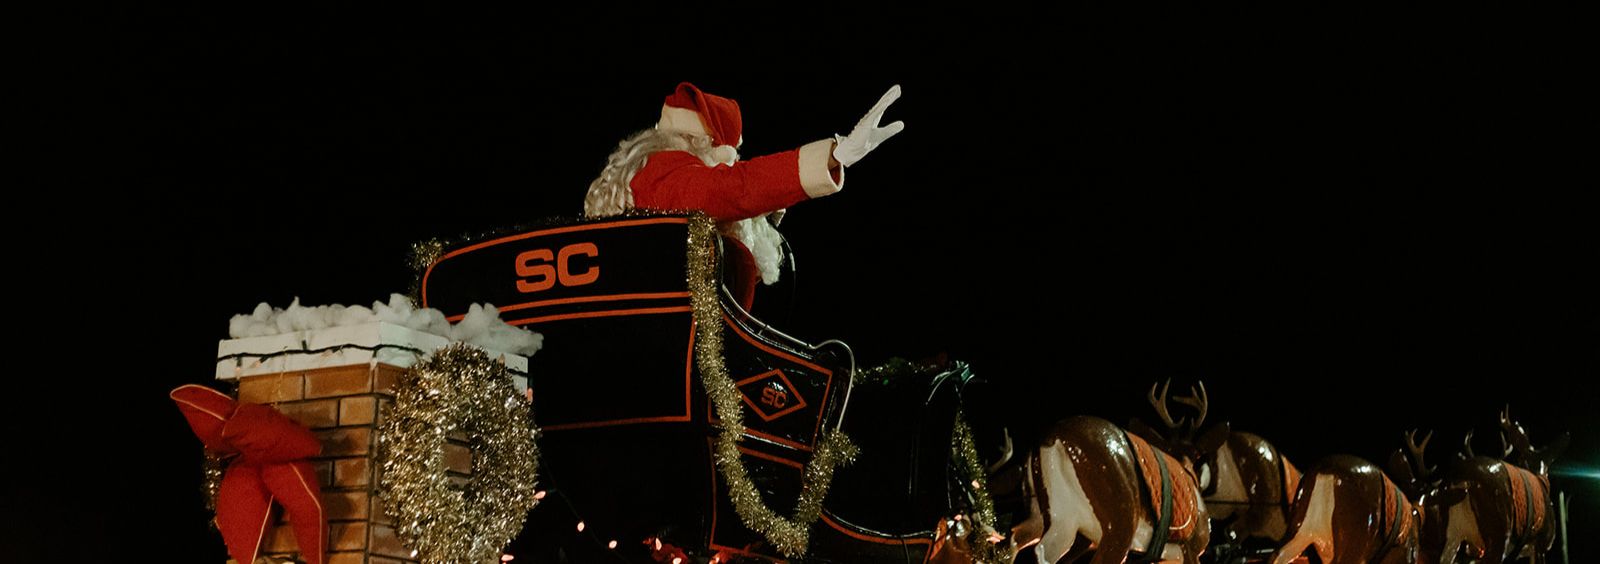 Santa Claus riding in a sleigh on a parade float waving at a crowd.